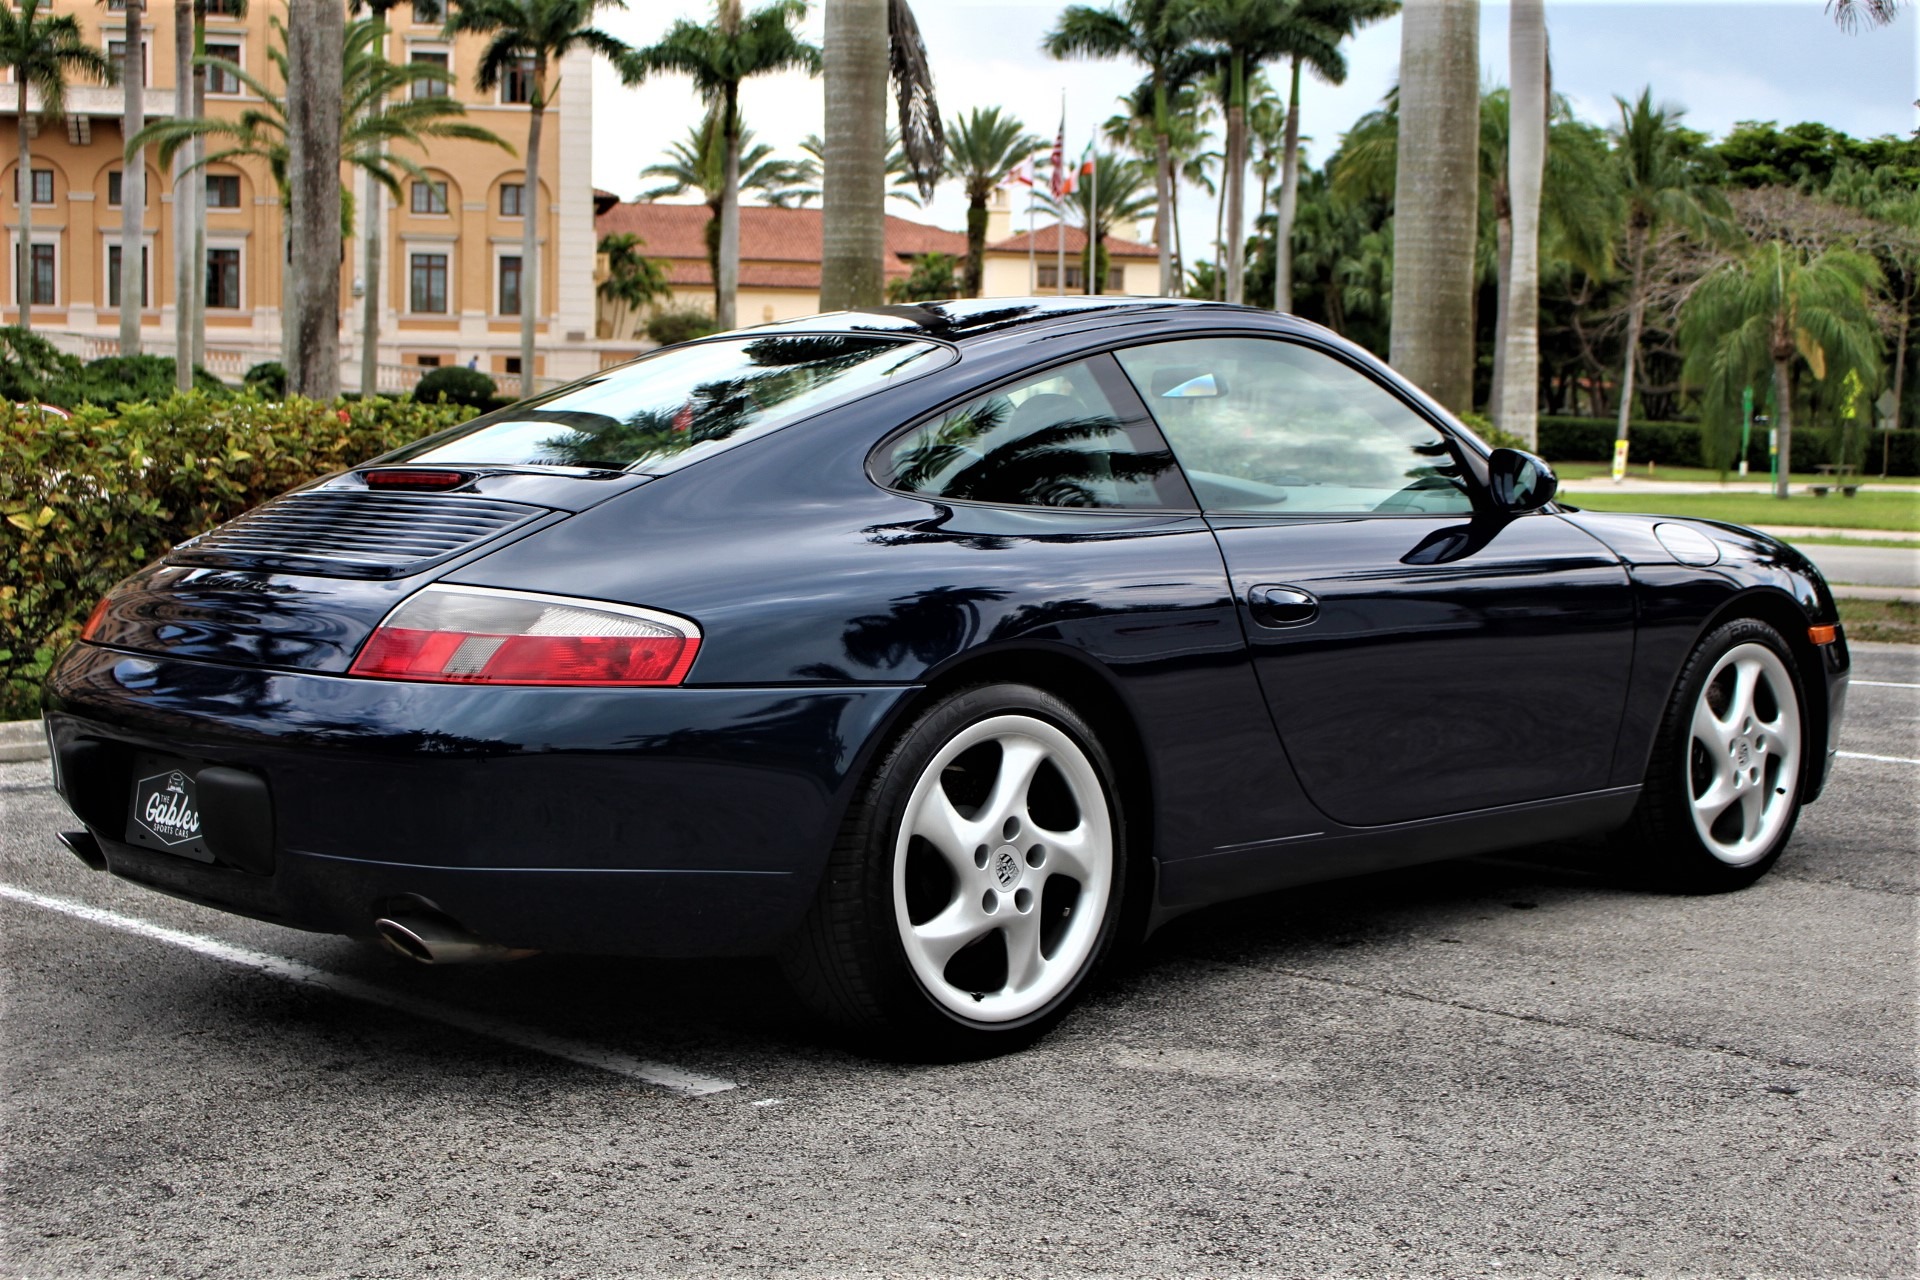 Used 2000 Porsche 911 Carrera for sale Sold at The Gables Sports Cars in Miami FL 33146 3